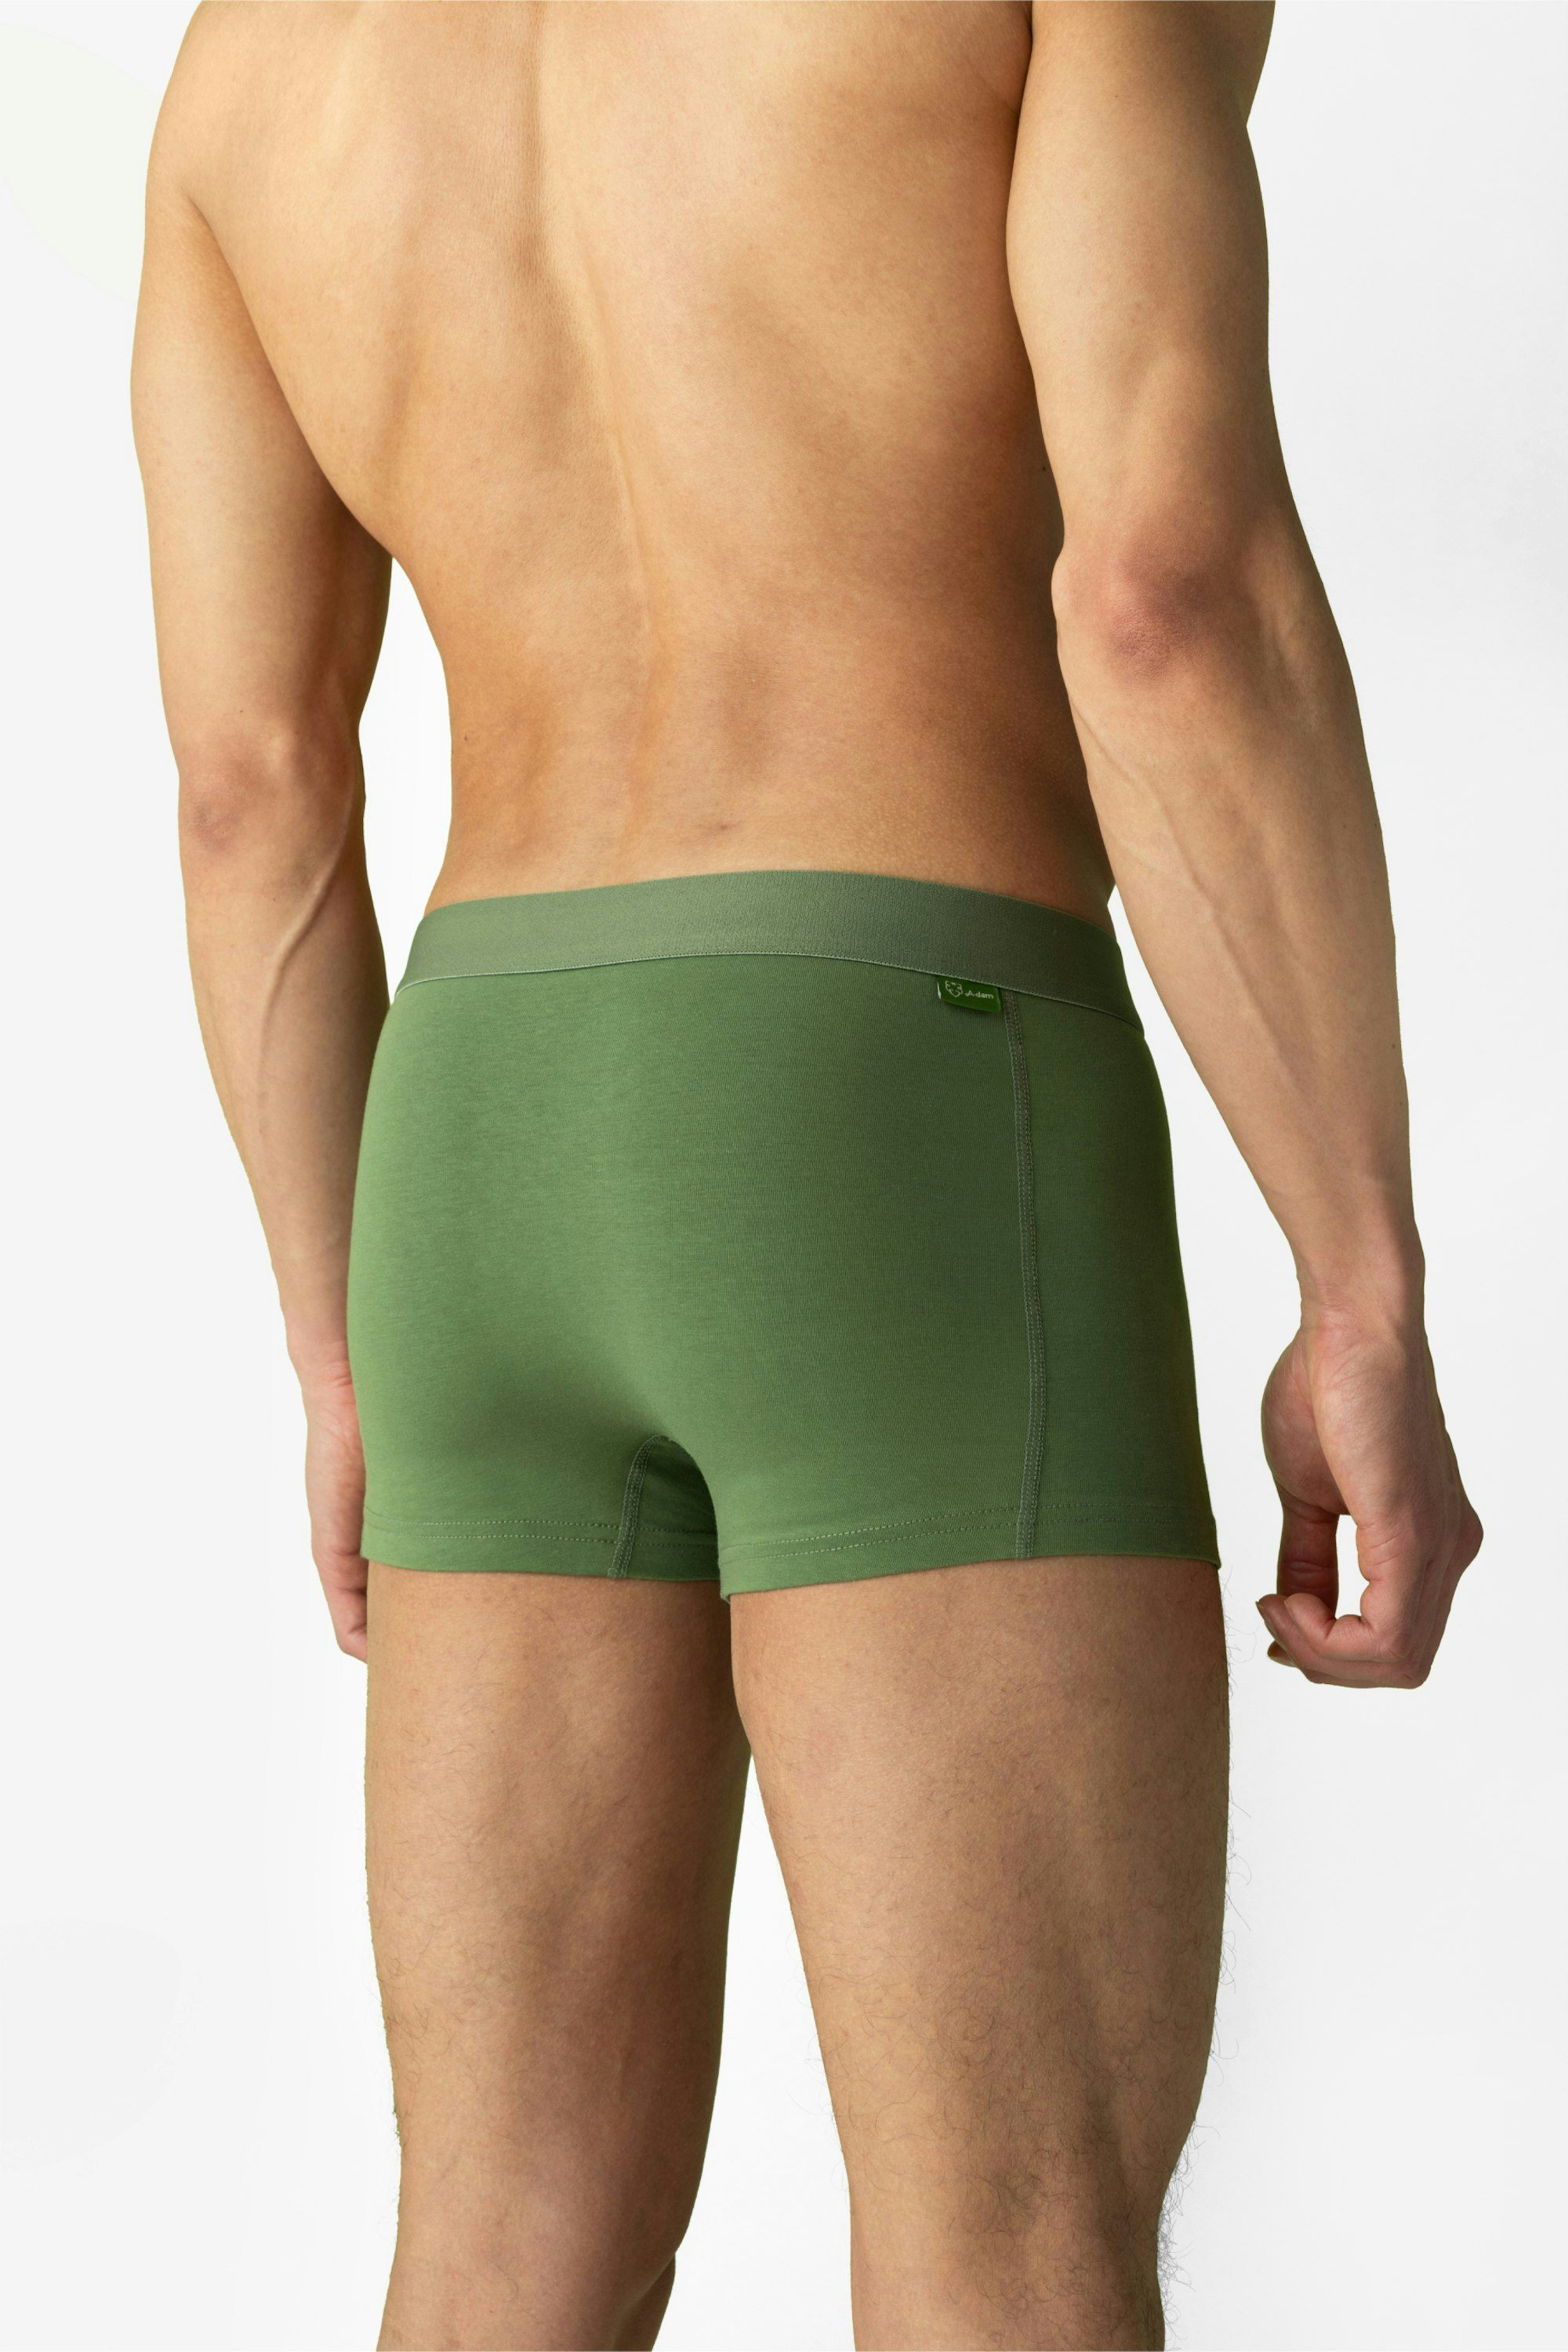 6xSolid Green Trunks